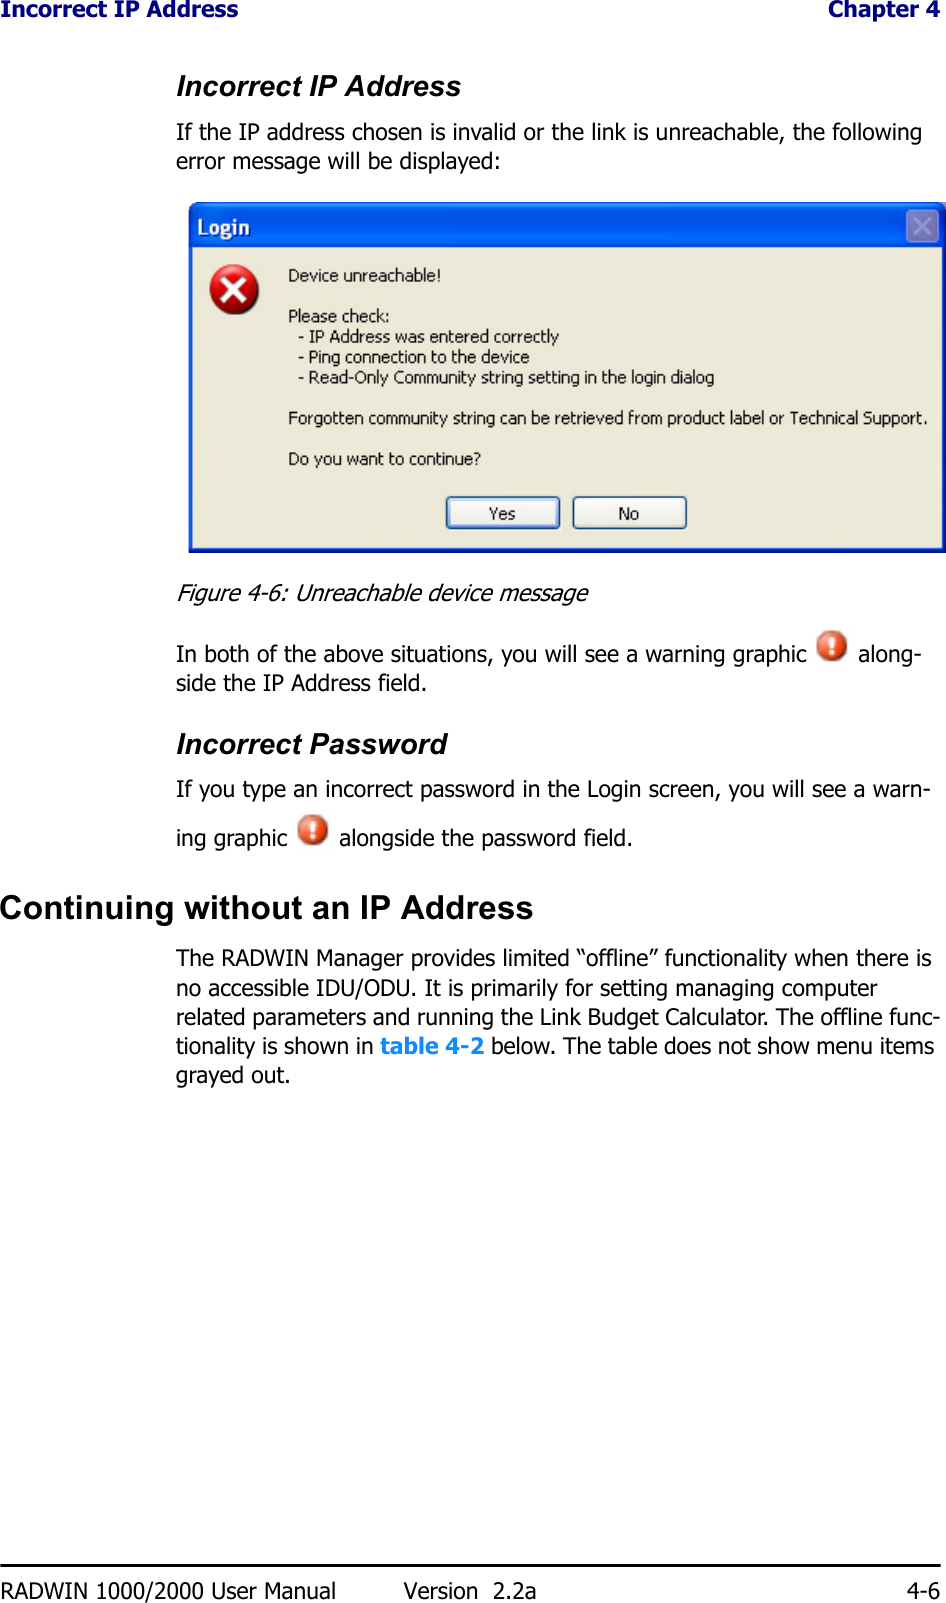 Incorrect IP Address  Chapter 4RADWIN 1000/2000 User Manual Version  2.2a 4-6Incorrect IP AddressIf the IP address chosen is invalid or the link is unreachable, the following error message will be displayed:Figure 4-6: Unreachable device messageIn both of the above situations, you will see a warning graphic   along-side the IP Address field.Incorrect PasswordIf you type an incorrect password in the Login screen, you will see a warn-ing graphic   alongside the password field.Continuing without an IP AddressThe RADWIN Manager provides limited “offline” functionality when there is no accessible IDU/ODU. It is primarily for setting managing computer related parameters and running the Link Budget Calculator. The offline func-tionality is shown in table 4-2 below. The table does not show menu items grayed out.